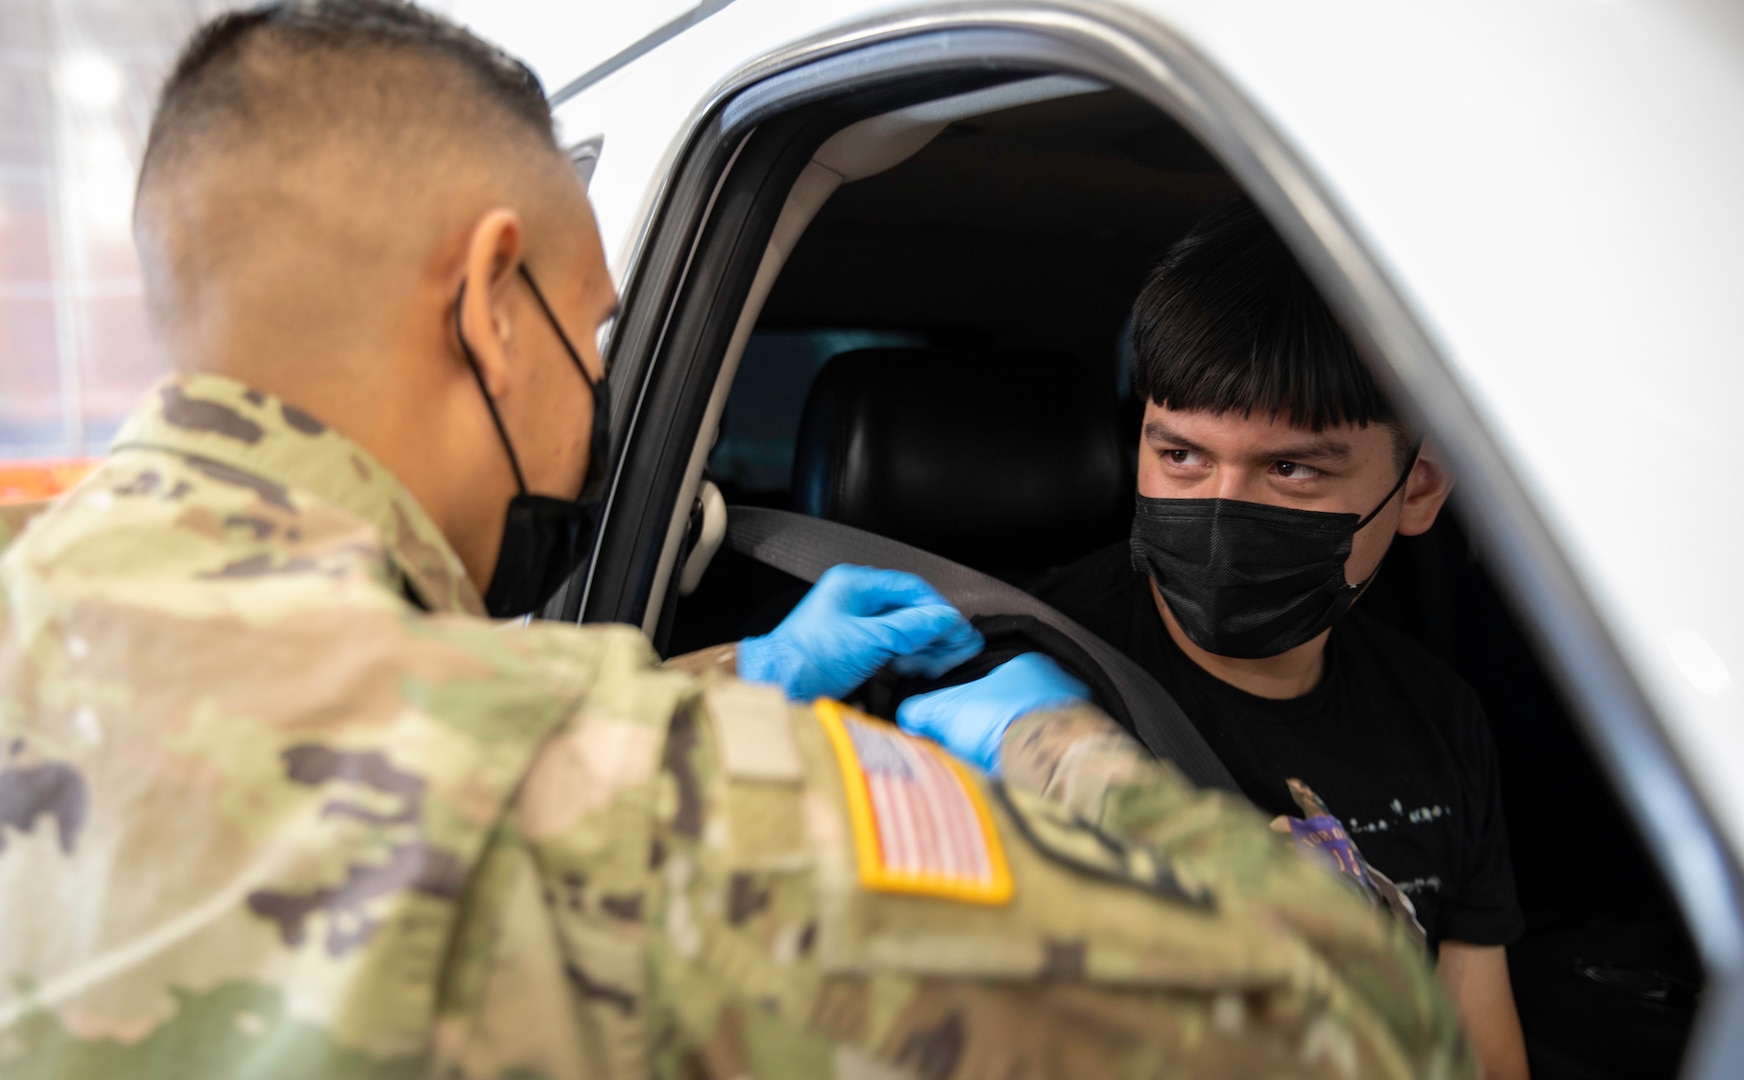 Service member administers COVID-19 vaccine to teen from car